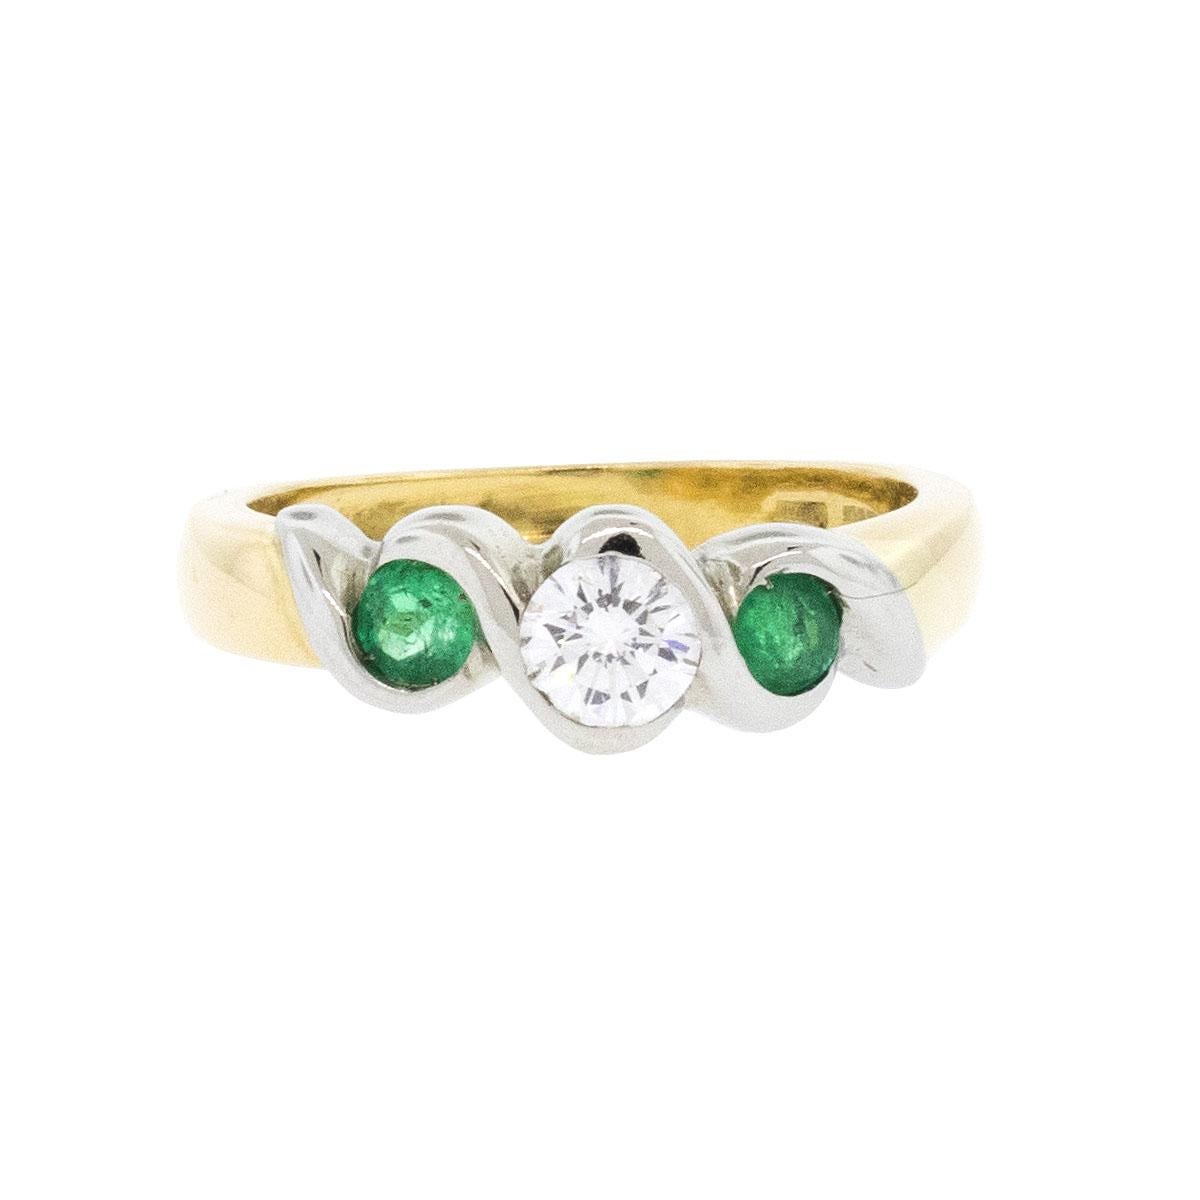 Company: N/A

Style of jewelry: Diamond & Emerald ring

Material: 18k yellow gold

Stones: Center Diamond and Emerald gemstones

Dimensions: 21mm x 0.7mm x 22mm

Weight: 5.5g (3.5dwt)

SKU: 12399-1